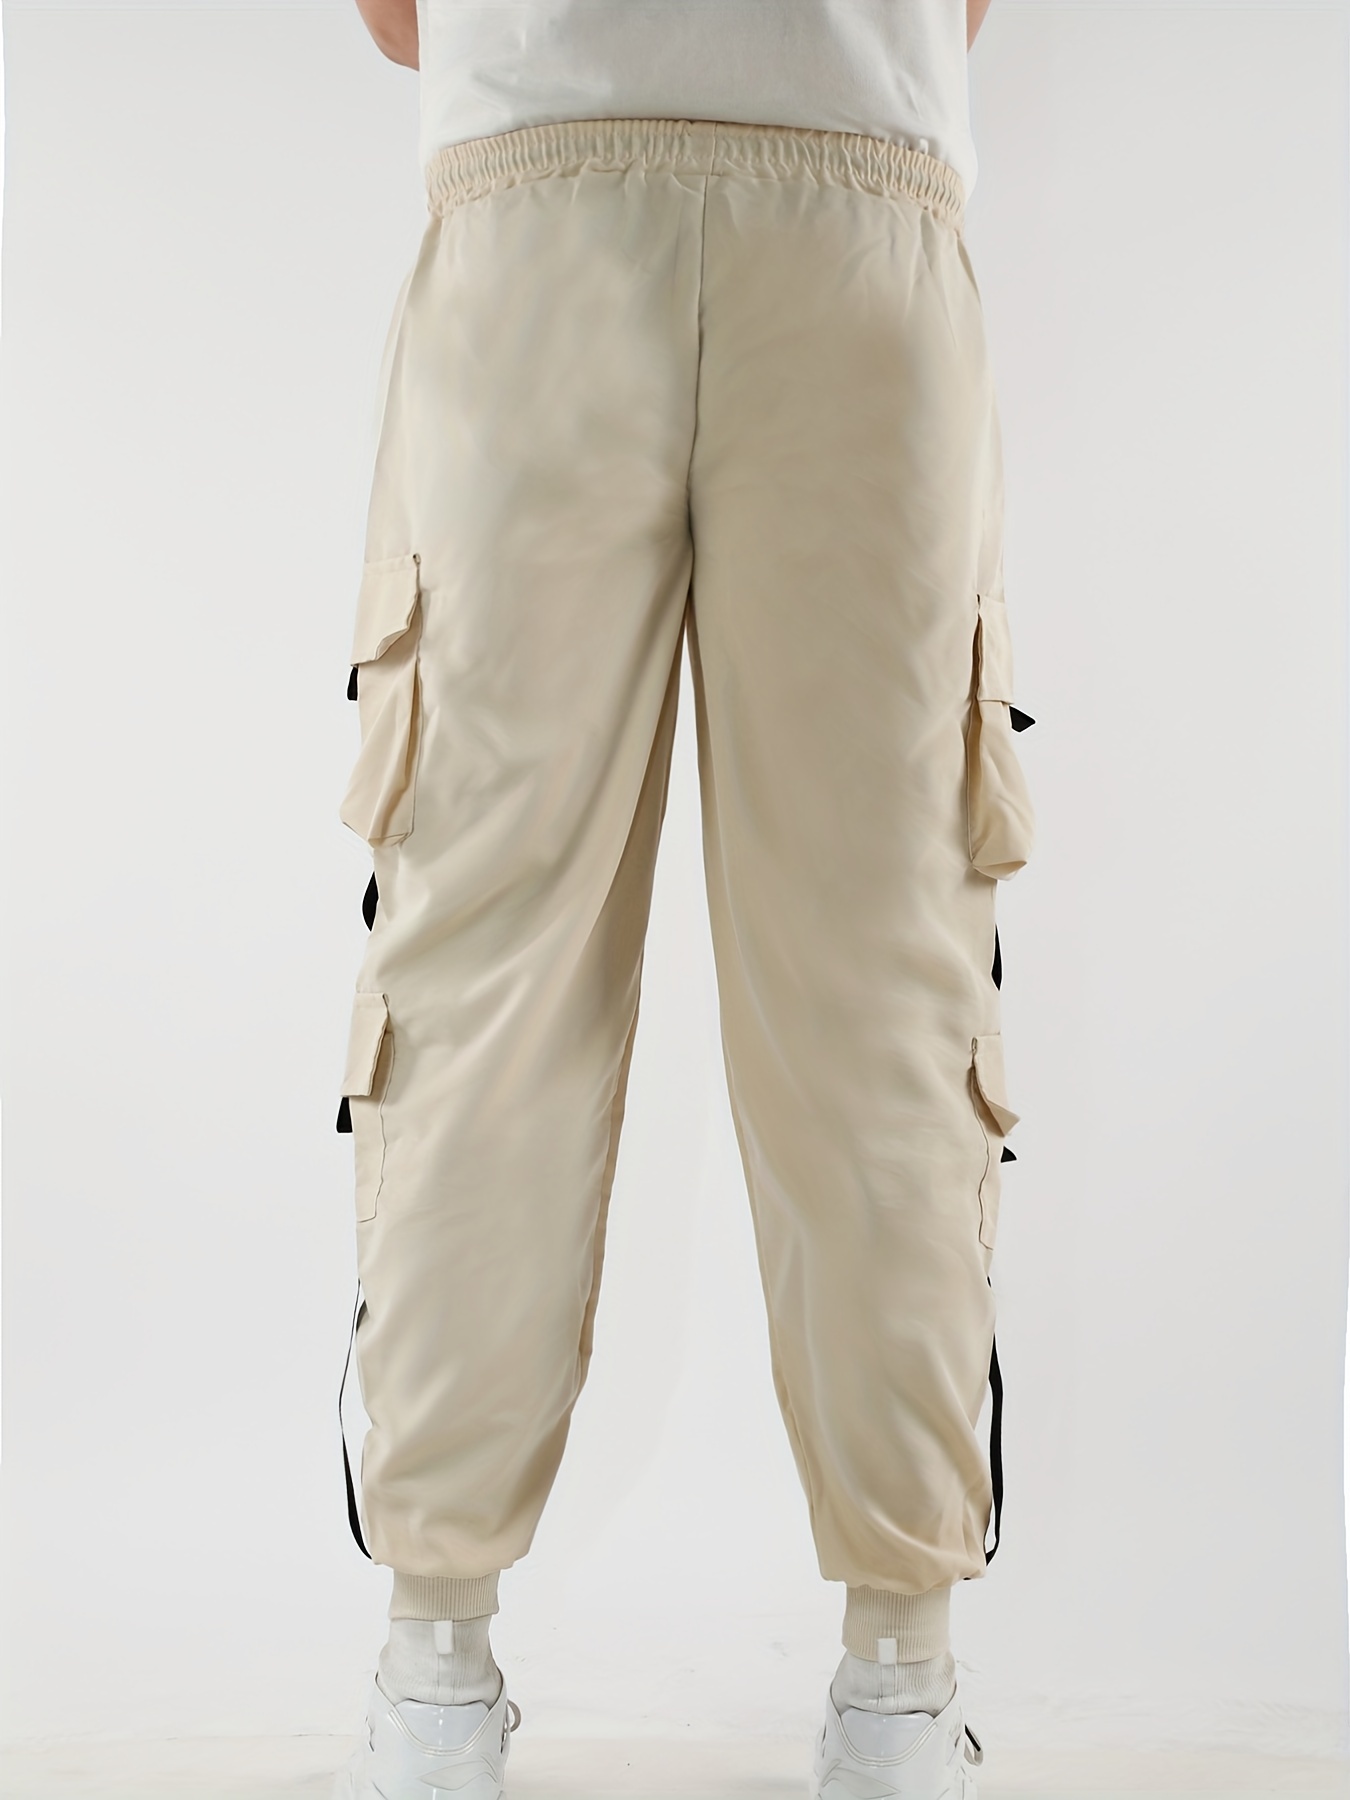 Mens Fashion Multi Pocket Casual Breathable Baggy Cargo Pants In Apricot